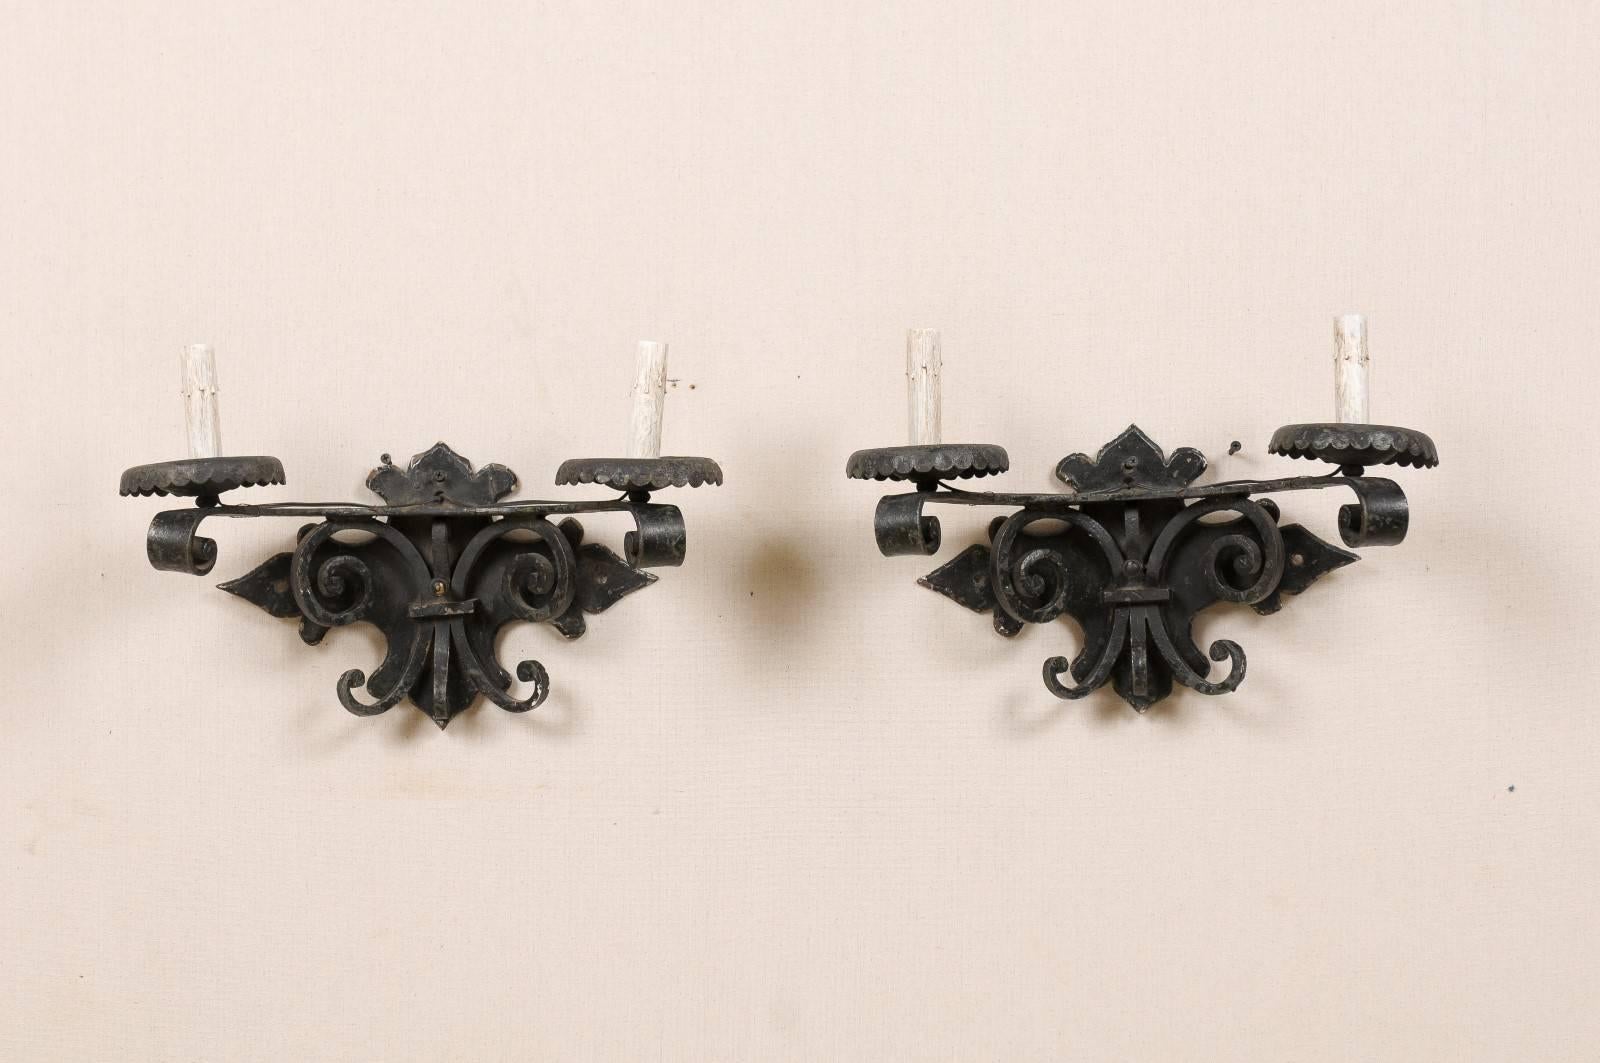 A pair of Spanish vintage dark colored forged iron two-light sconces from the mid-20th century. This pair of sconces is adorned with scrolls underneath the arms attached to a nicely shaped backplate. The scrolled arms support the metal bobèches and